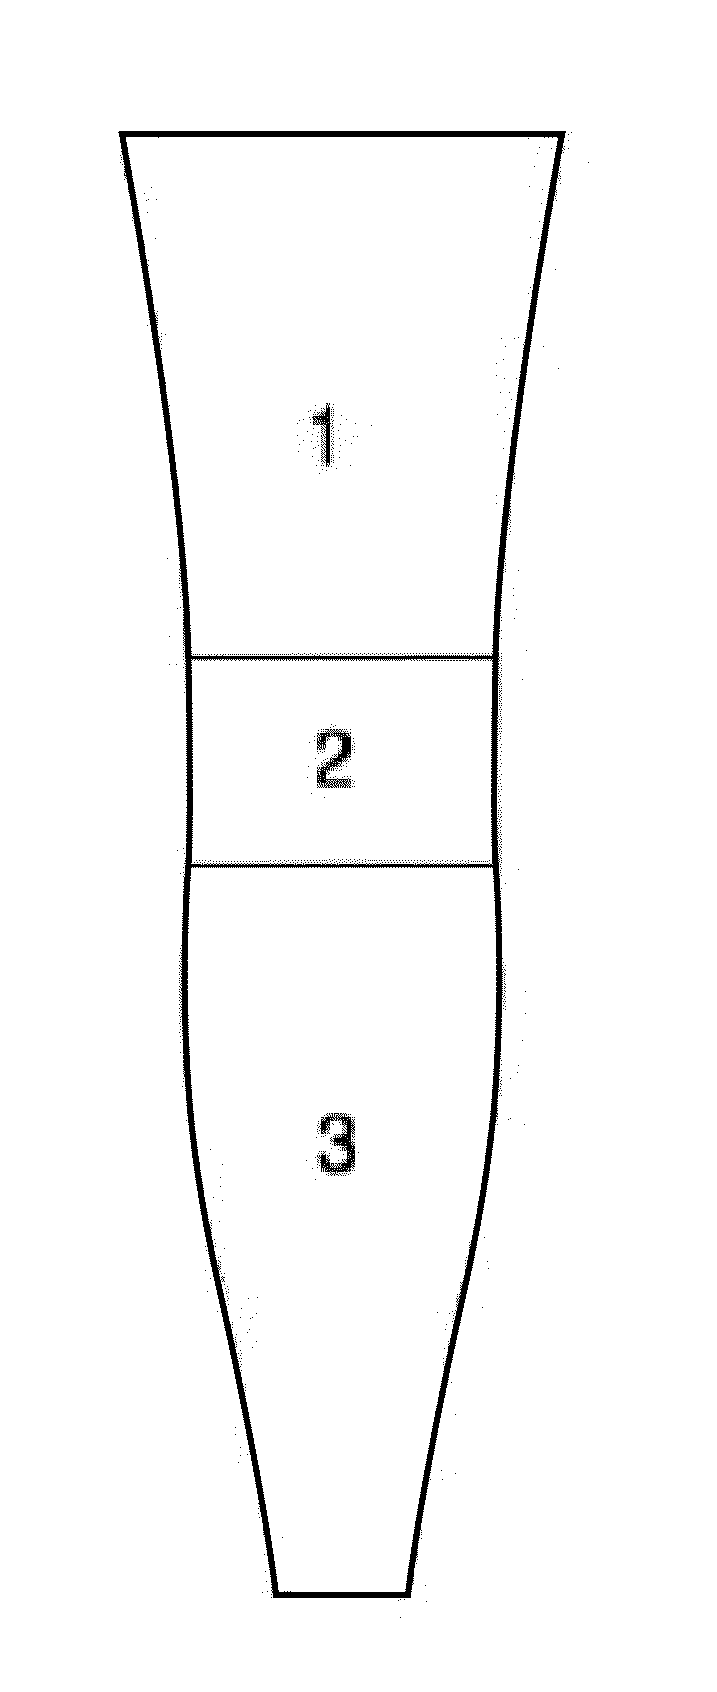 Method for the selective removal of sulfites from beverages and modular apparatus for same